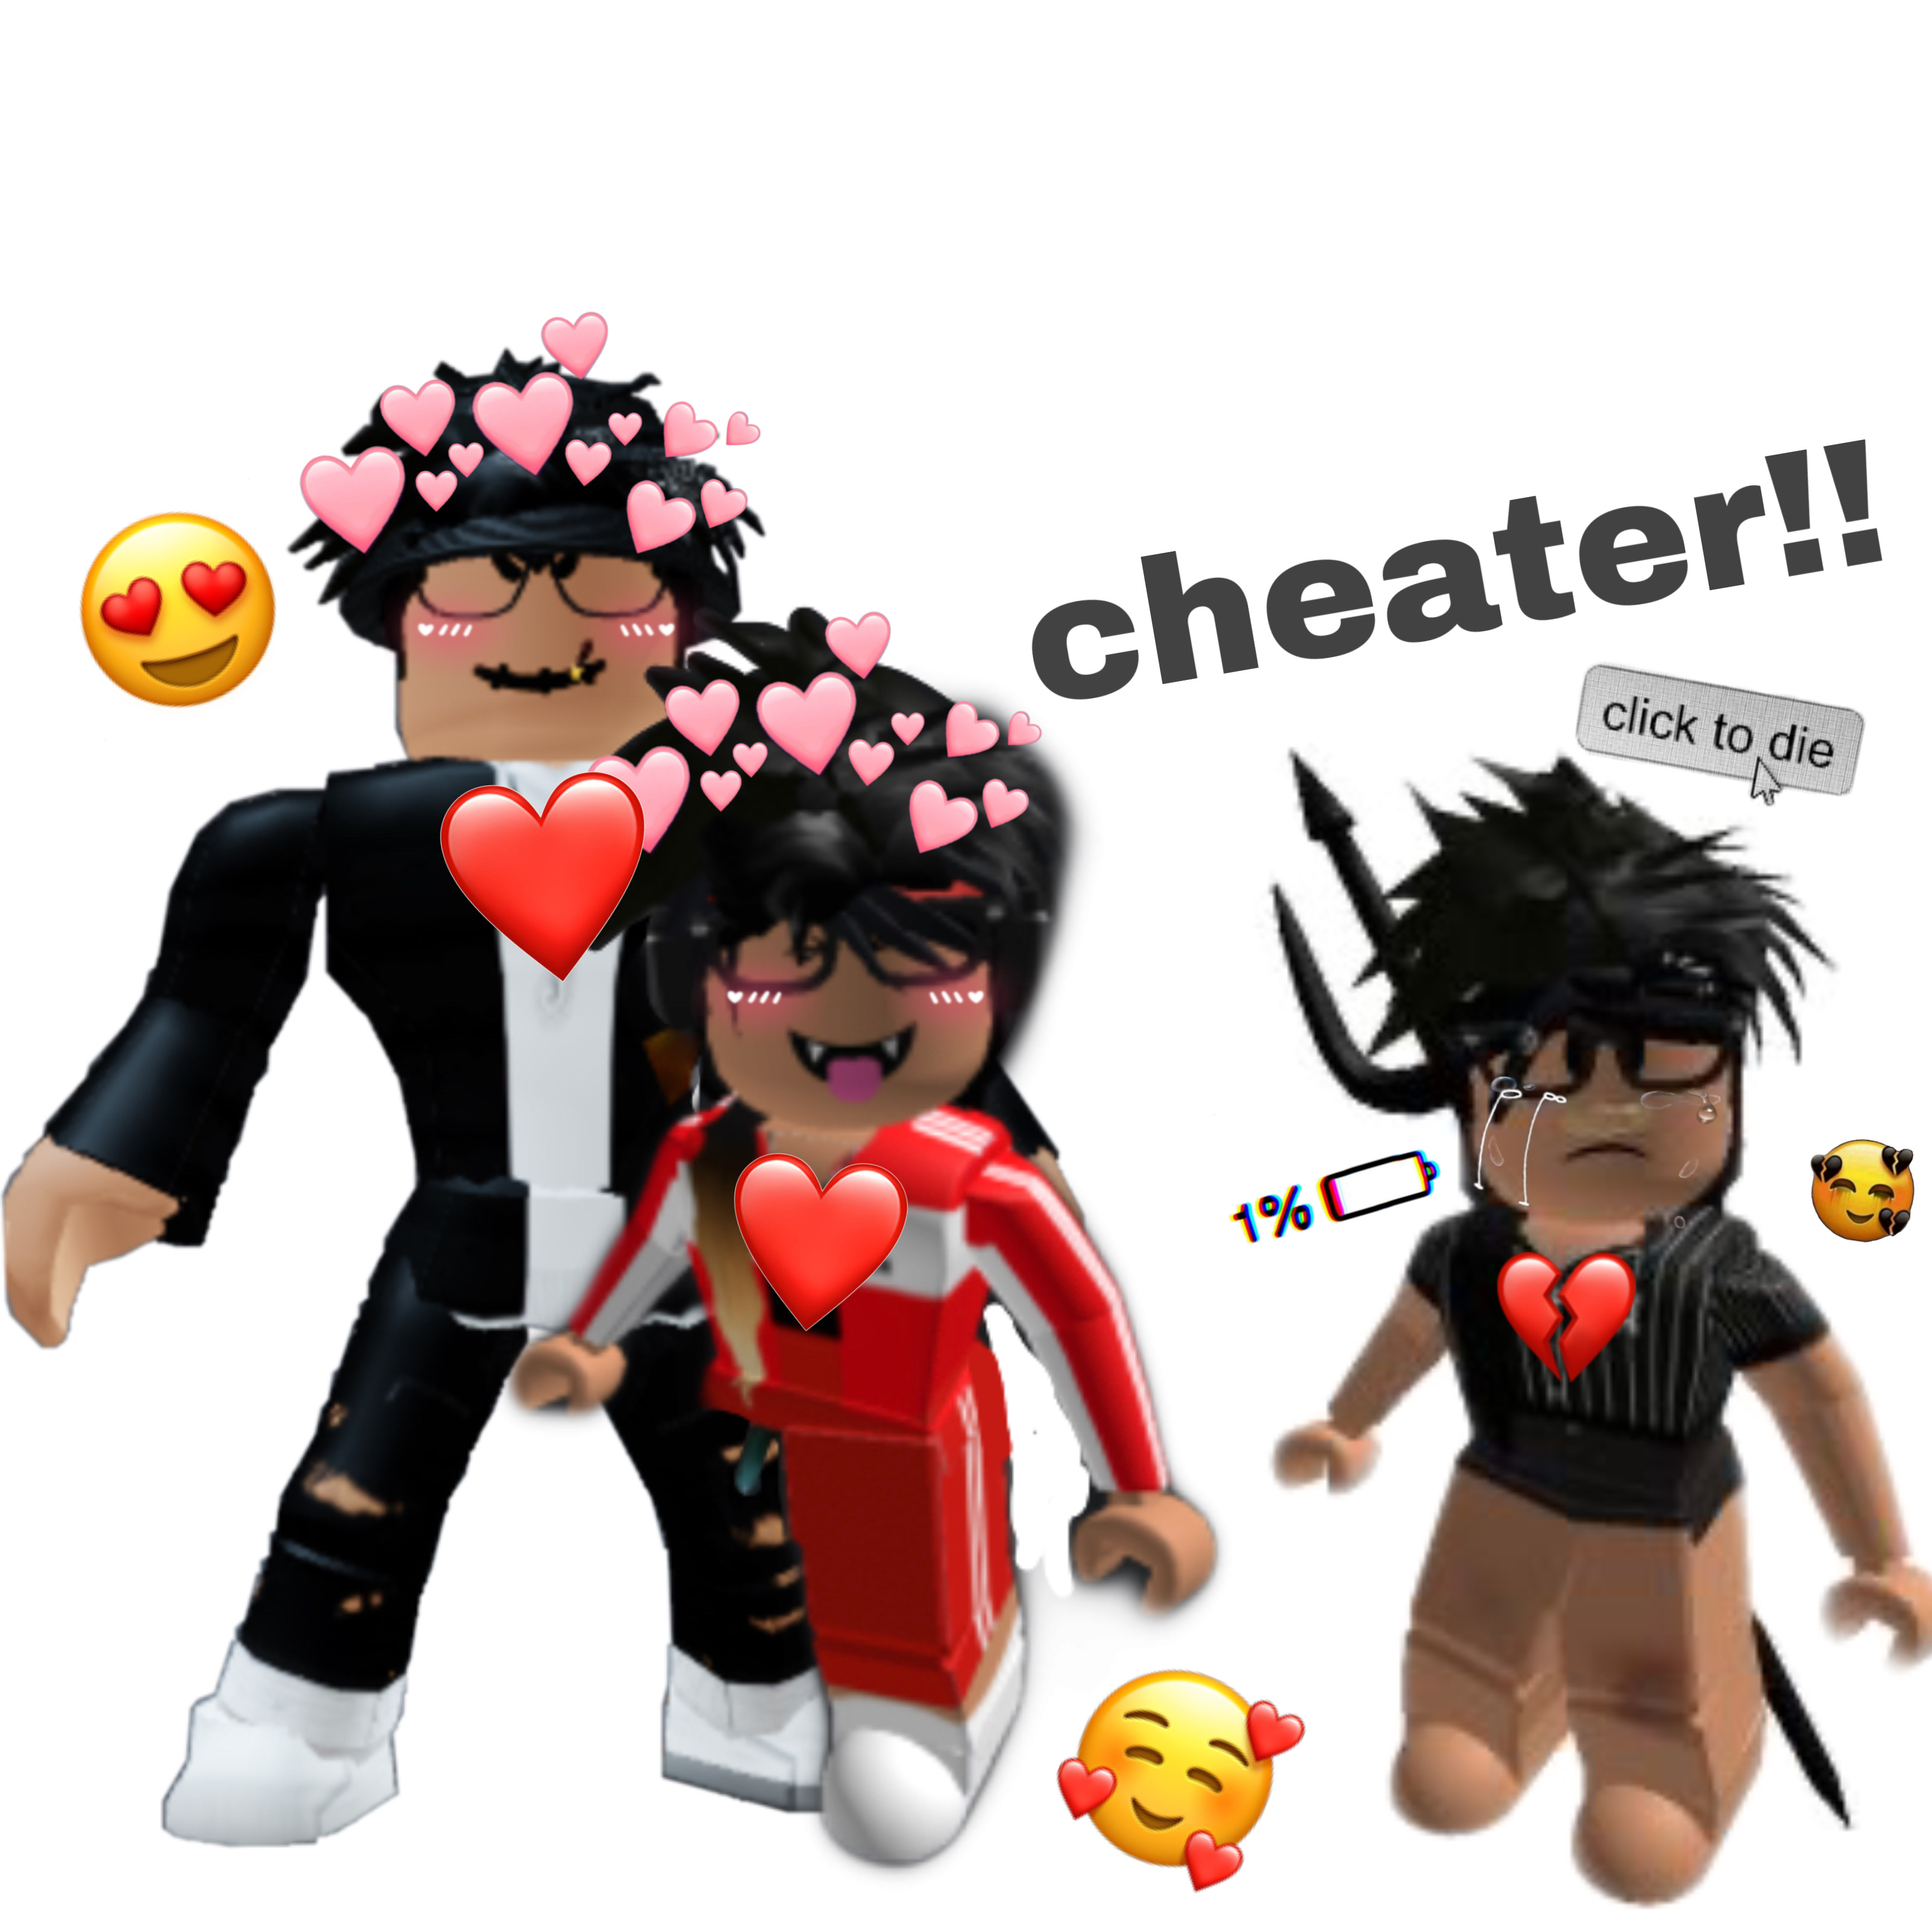 Roblox Lmao Copy And Paste When Their Image By Ch1zu8 - roblox copy and paste outfits